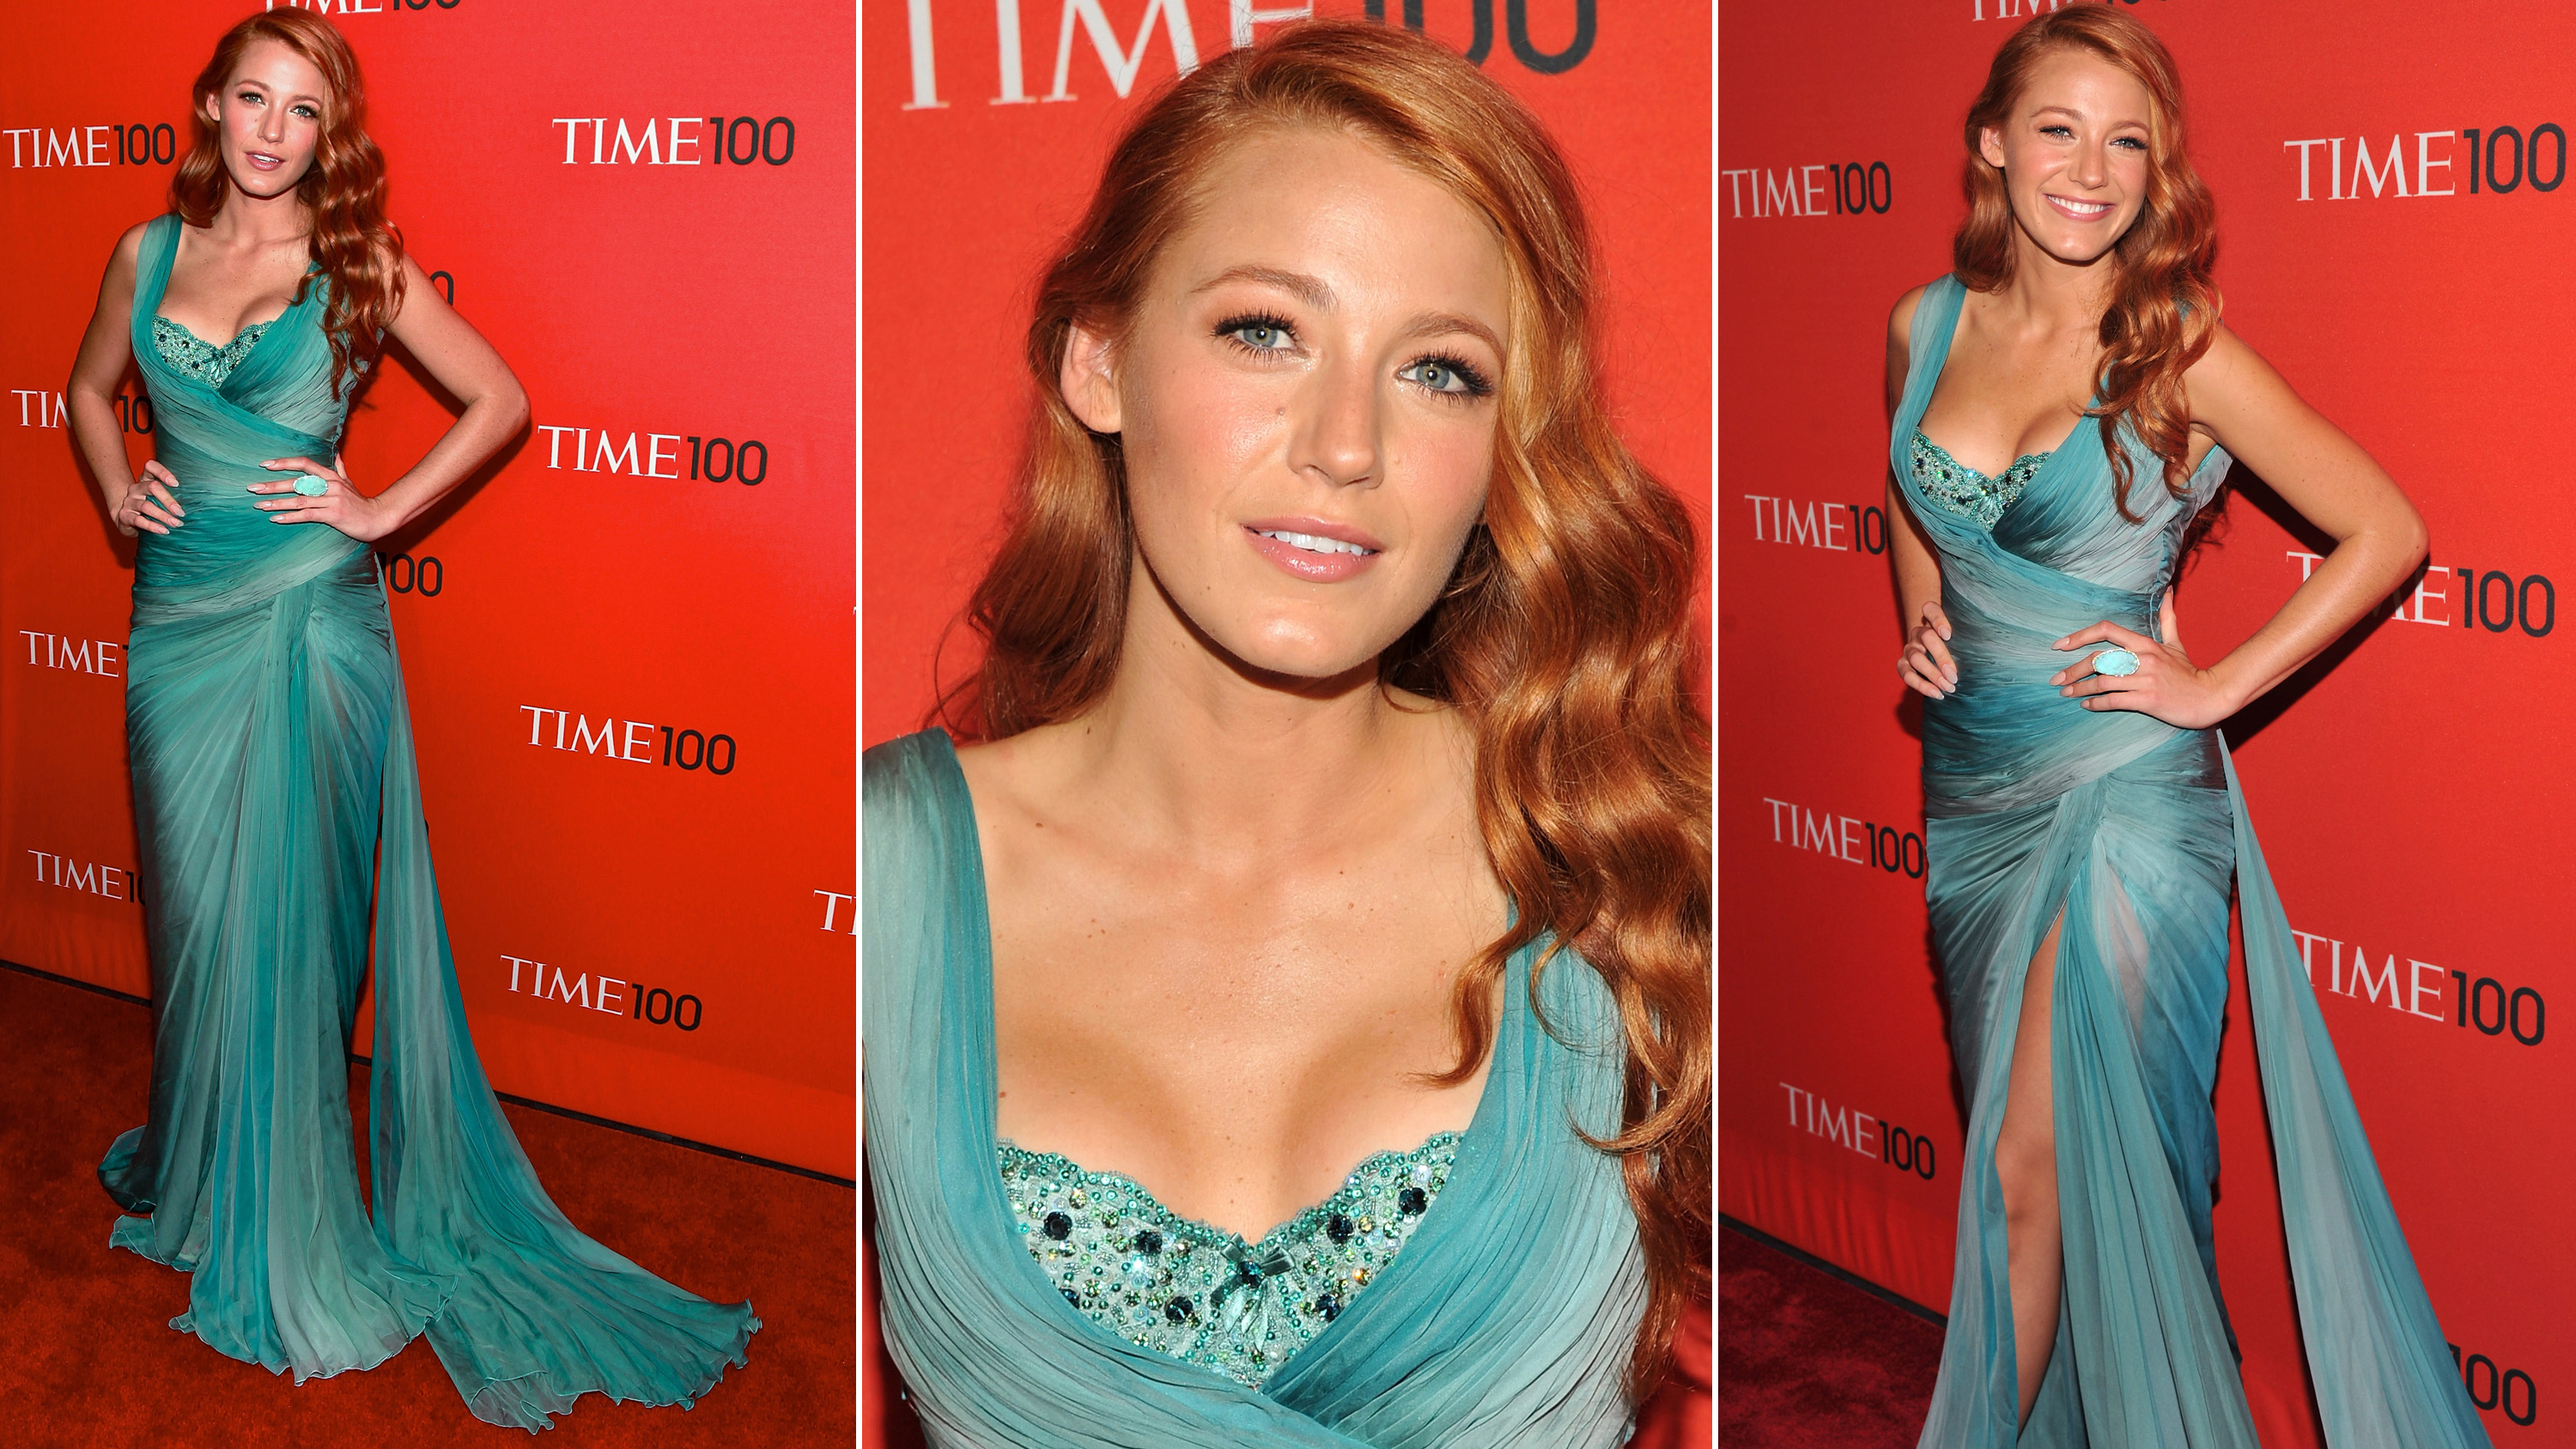 blake-lively-time-100-gown